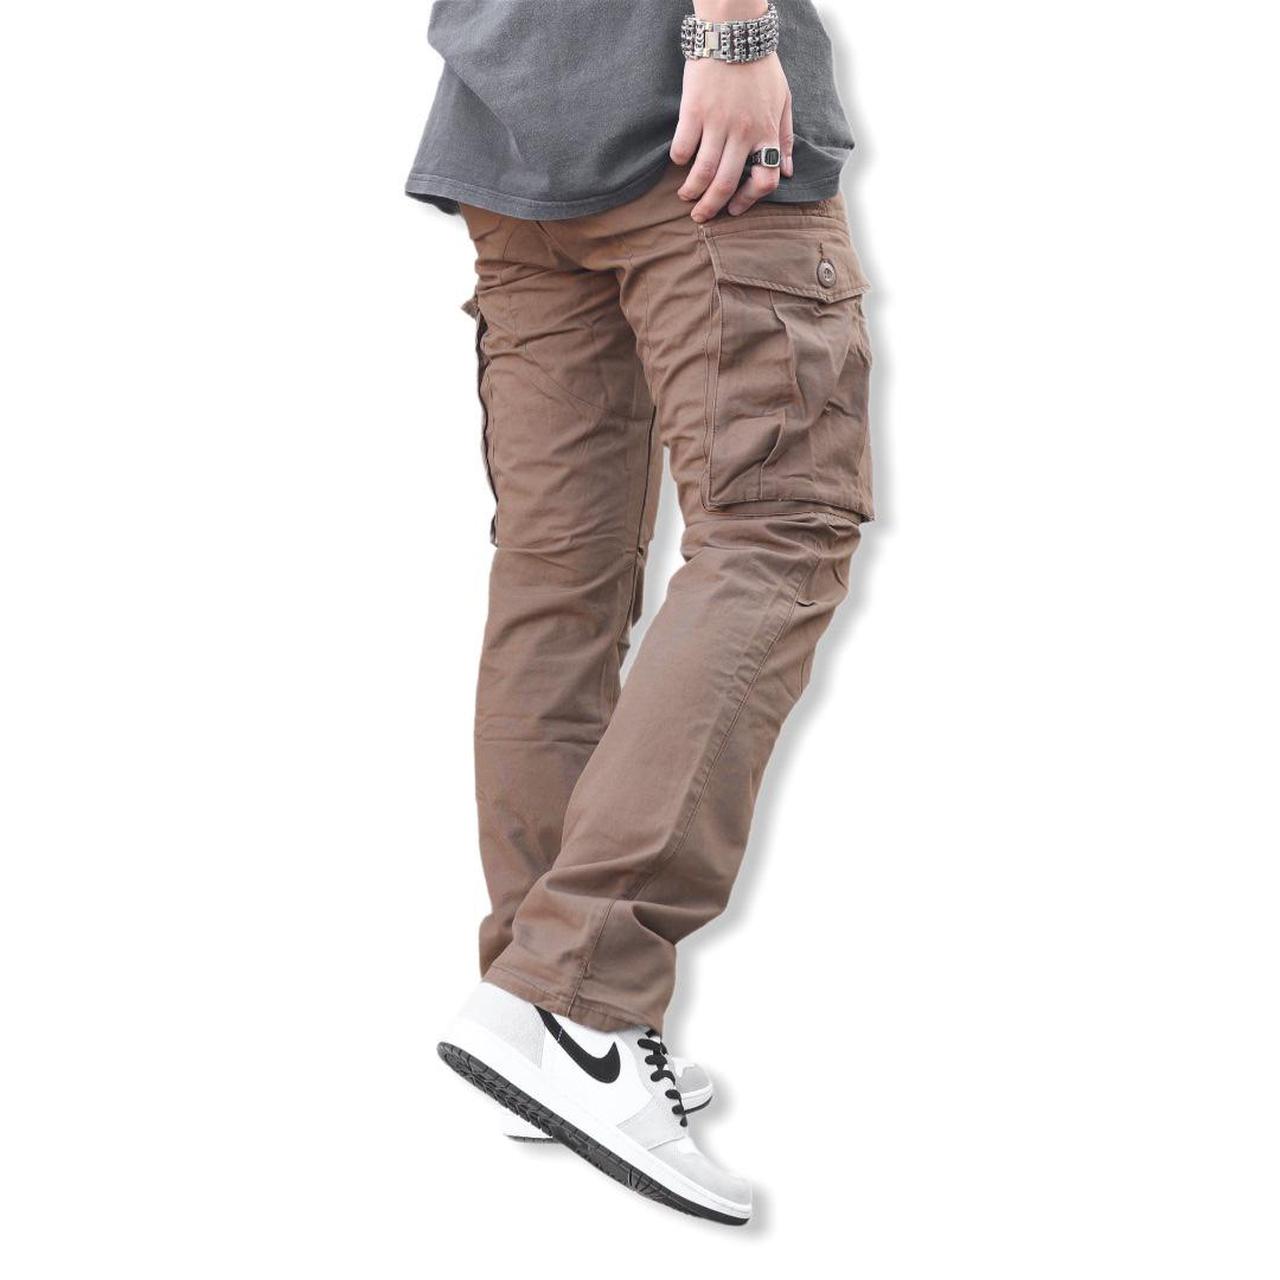 Product Image 3 - Cargo Pants Mocha Brown
• Sightly